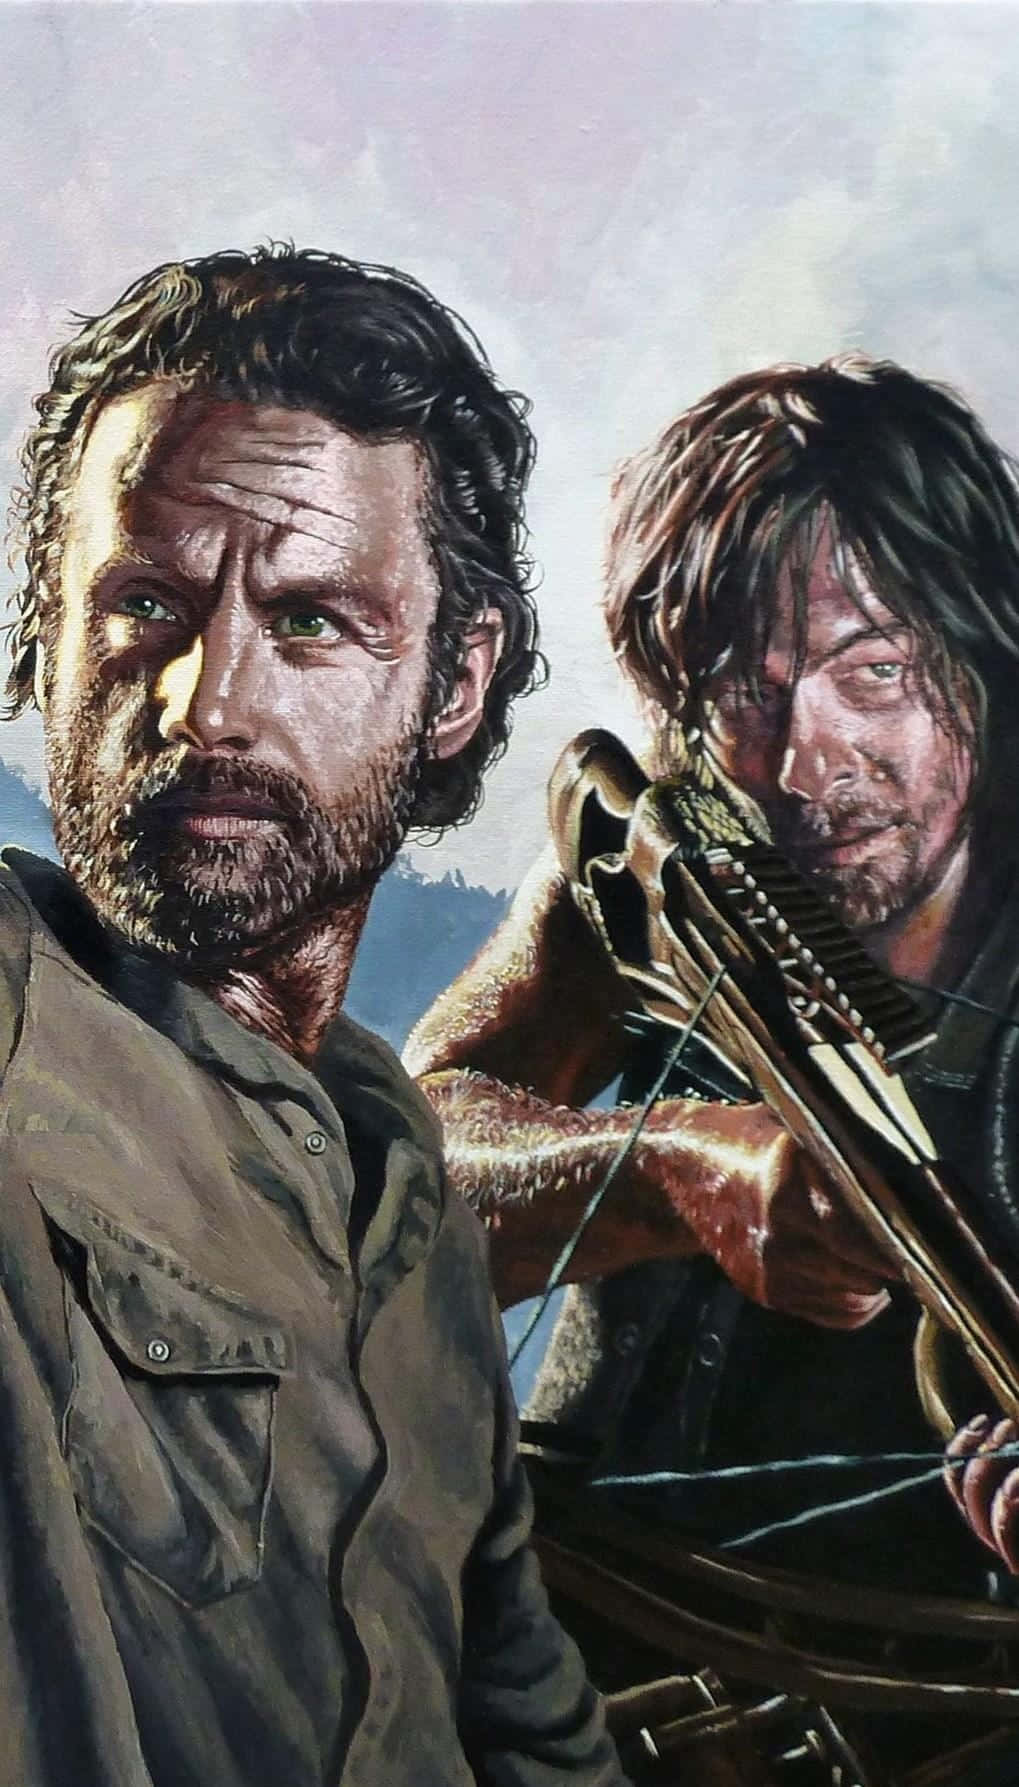 Get ready for the zombie apocalypse with The Walking Dead iPhone Wallpaper